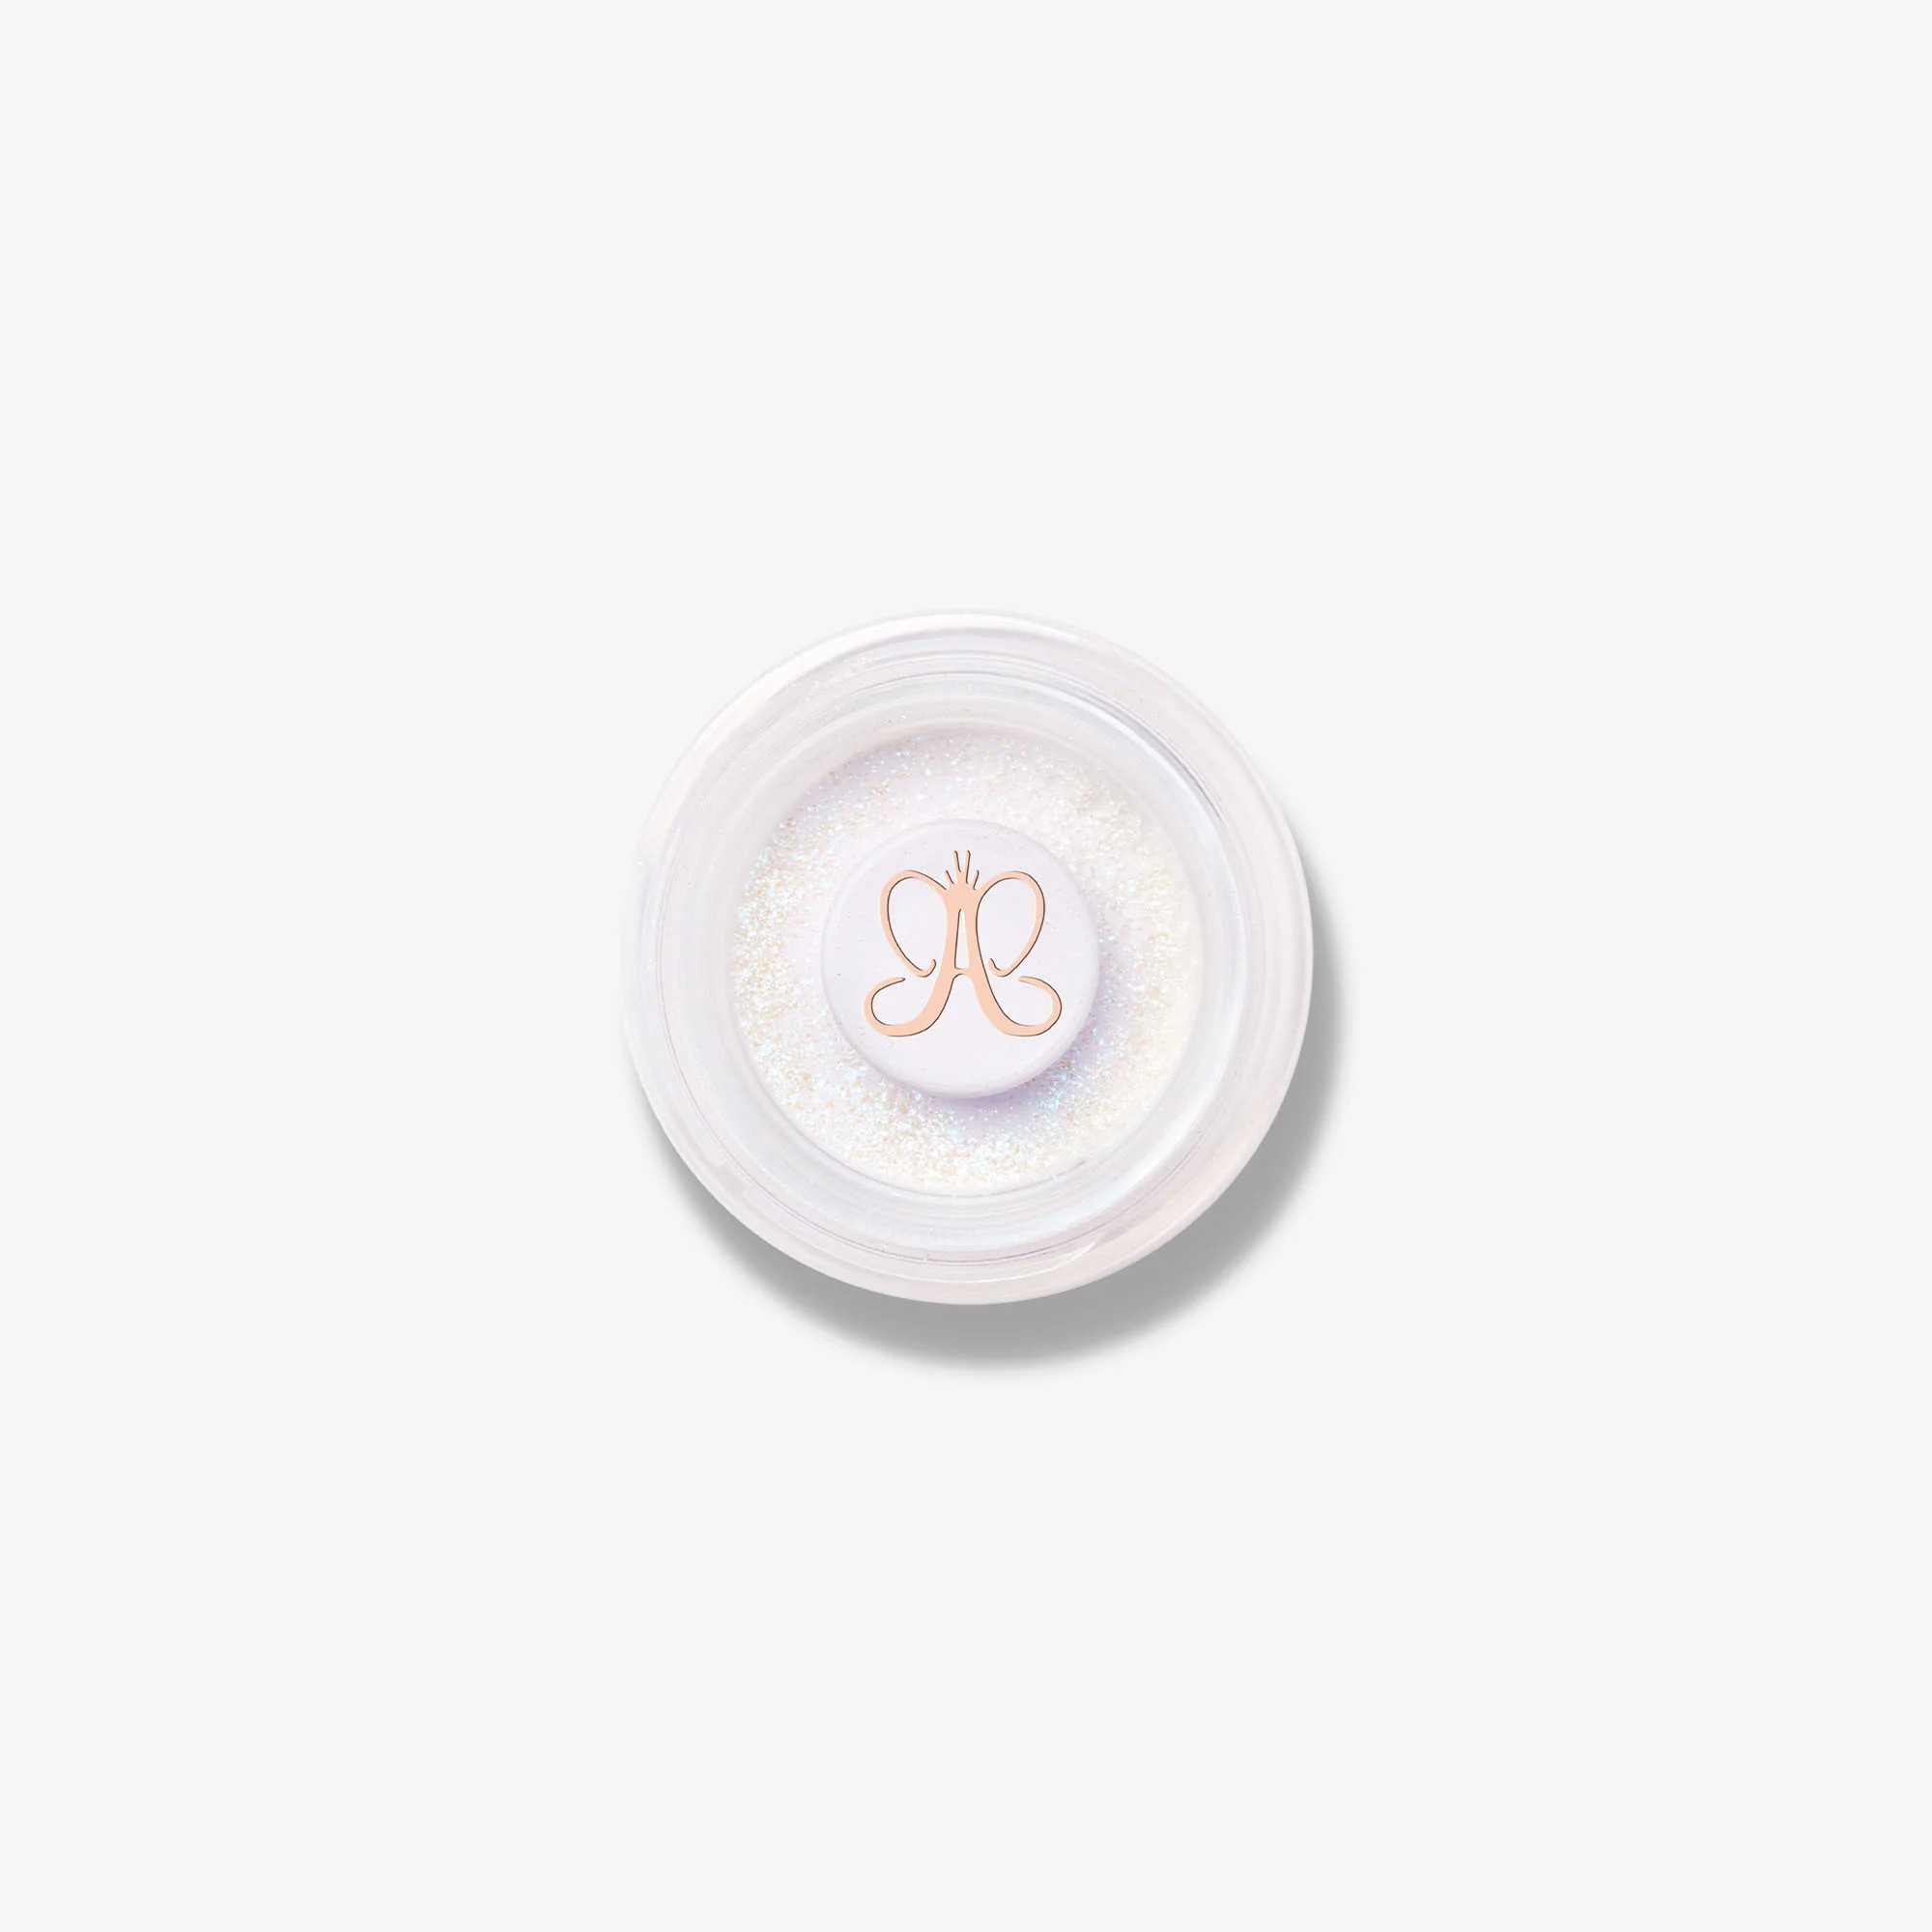 Cosmic Collection Space Dust Powder | Anastasia Beverly Hills | Anastasia Beverly Hills